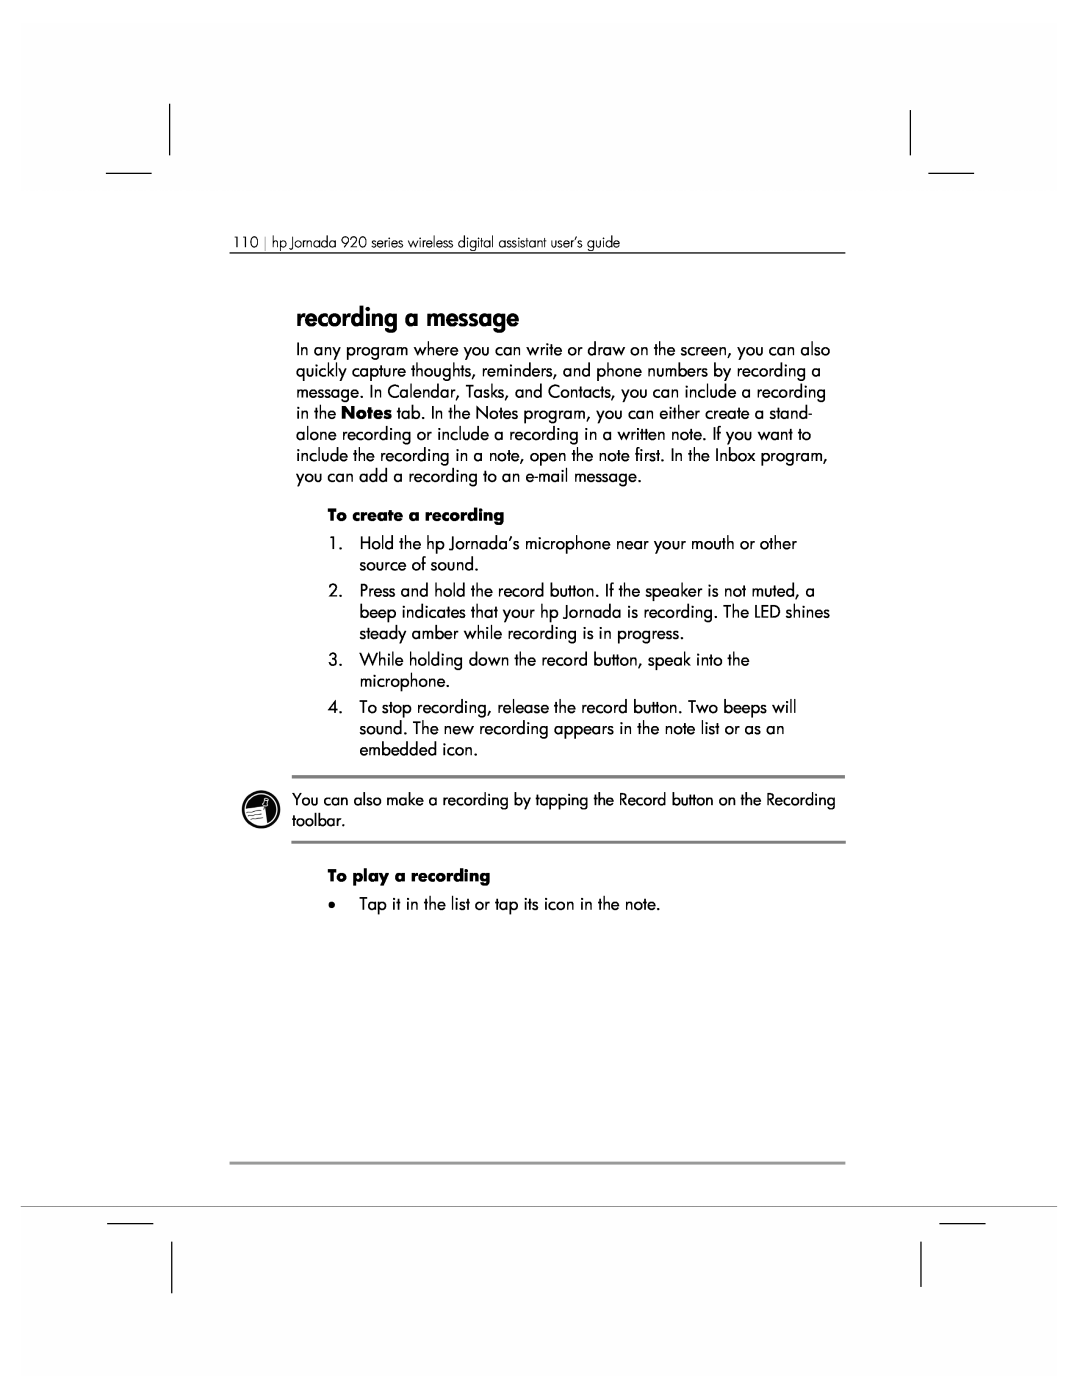 HP 920 manual recording a message 